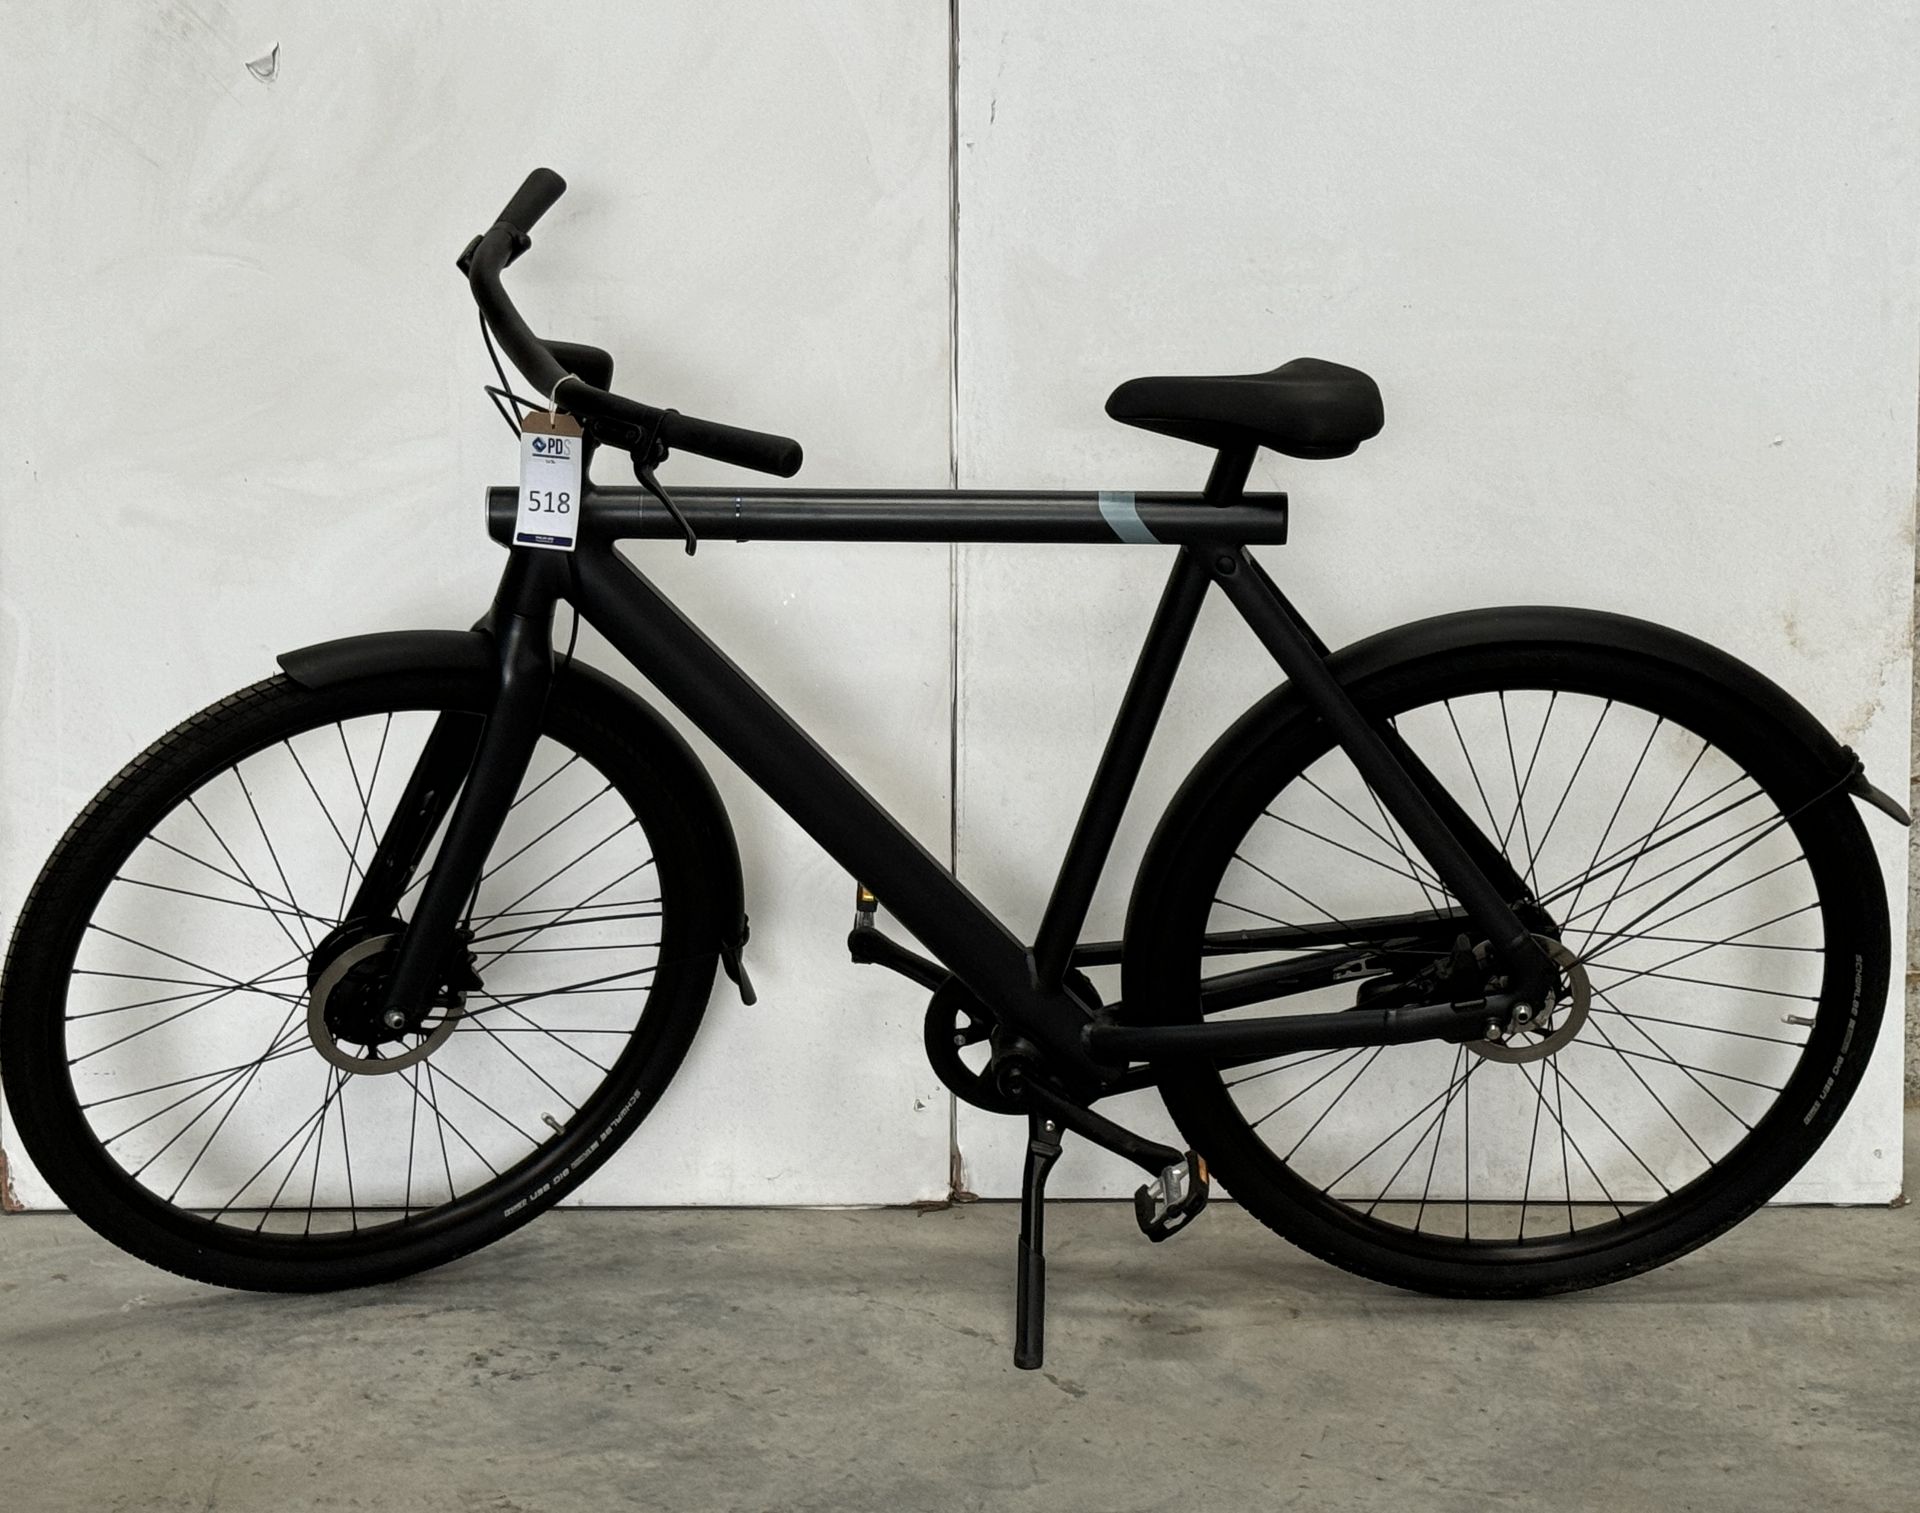 VanMoof S3 Electric Bike, Frame Number ASY1040395 (NOT ROADWORTHY - FOR SPARES ONLY) (No codes